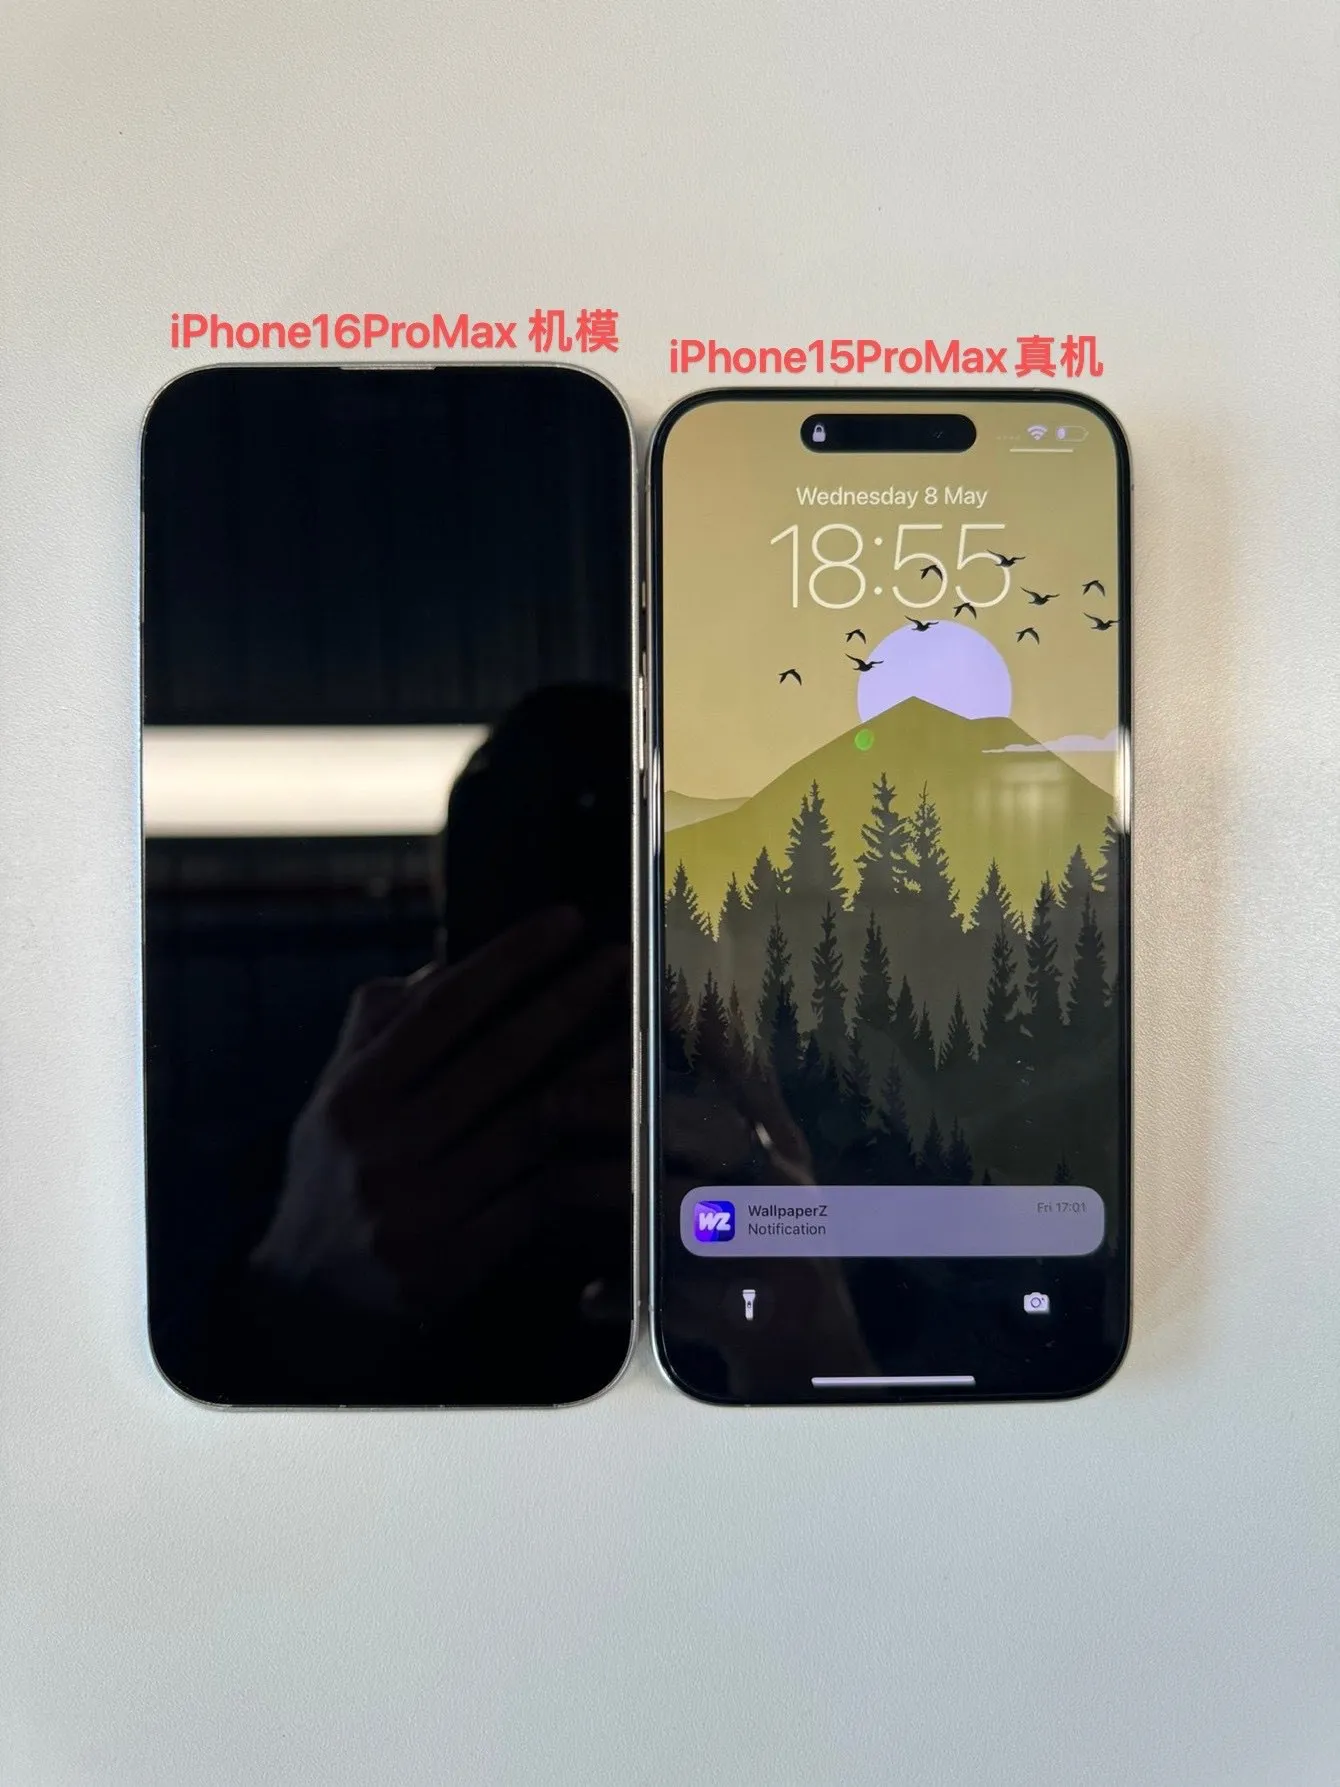 Leaked Images Suggest iPhone 16 Pro Max to Feature Larger 6.9-Inch Display